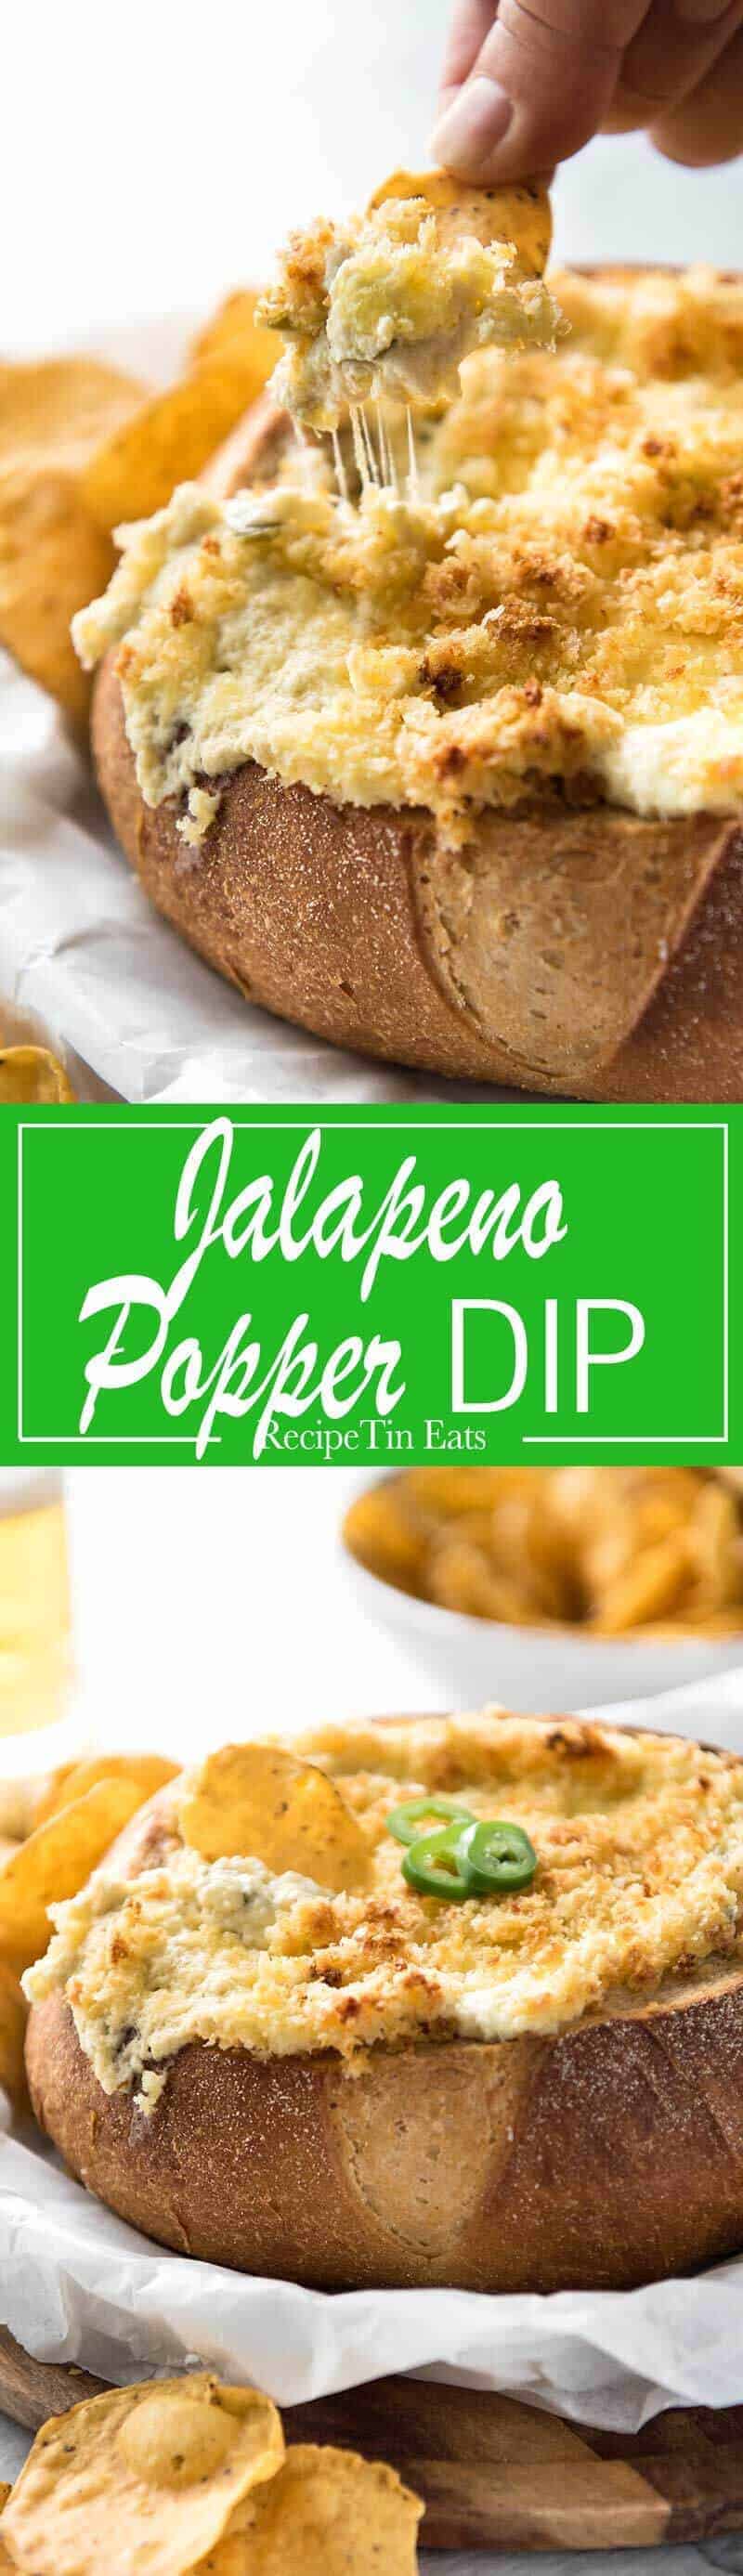 It's a Jalapeño Popper - in dip form! A warm creamy dip spiked with jalapeño, topped with a crunchy panko topping!